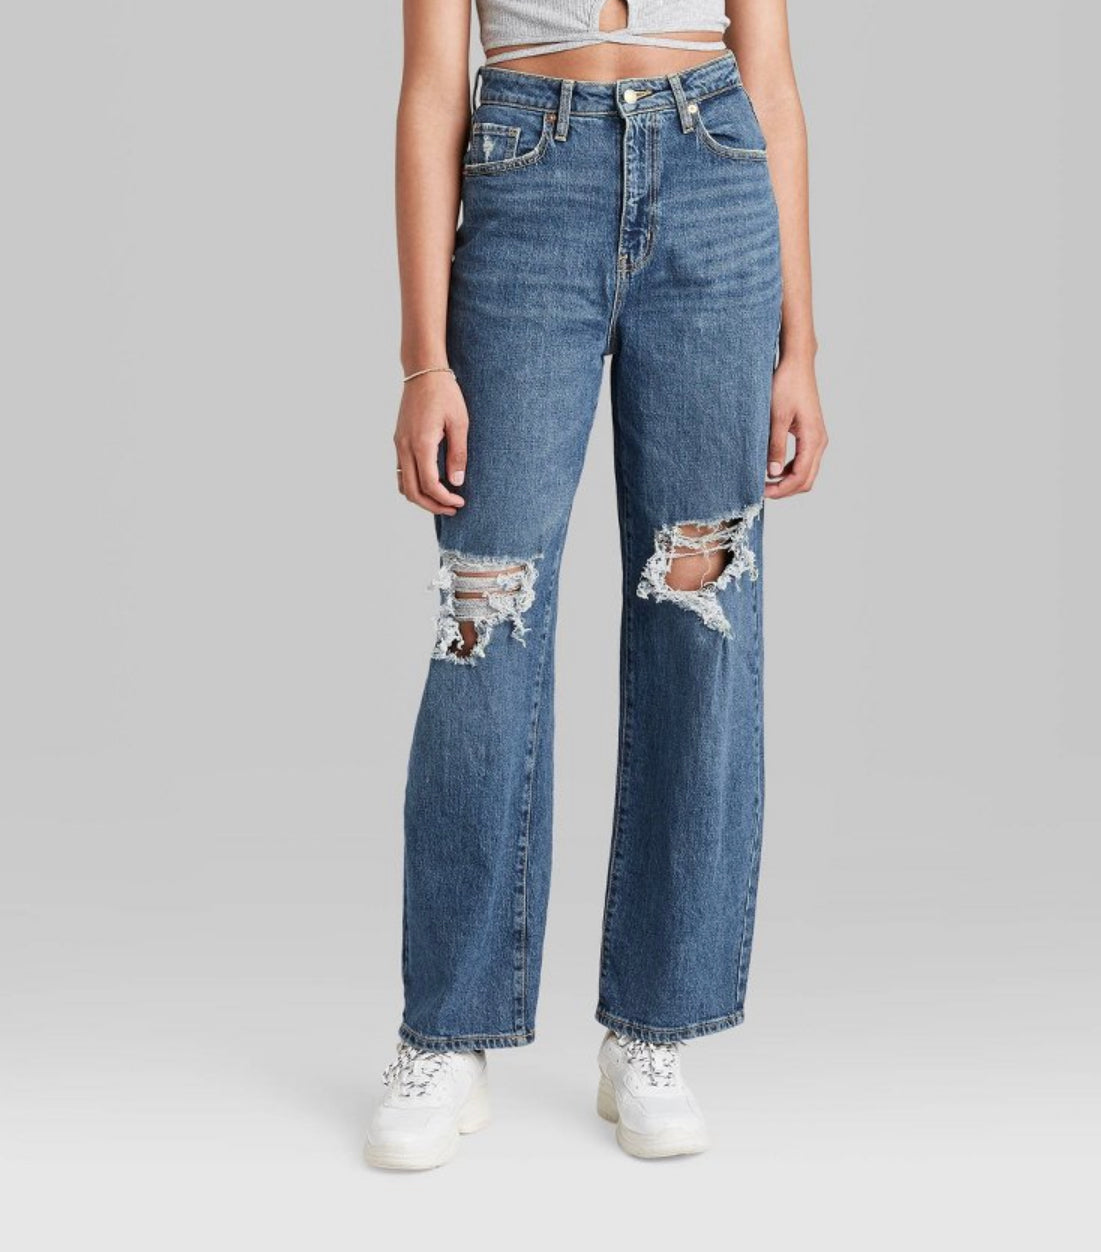 Women's Super-High Rise Distressed Cropped Straight Jeans - Wild